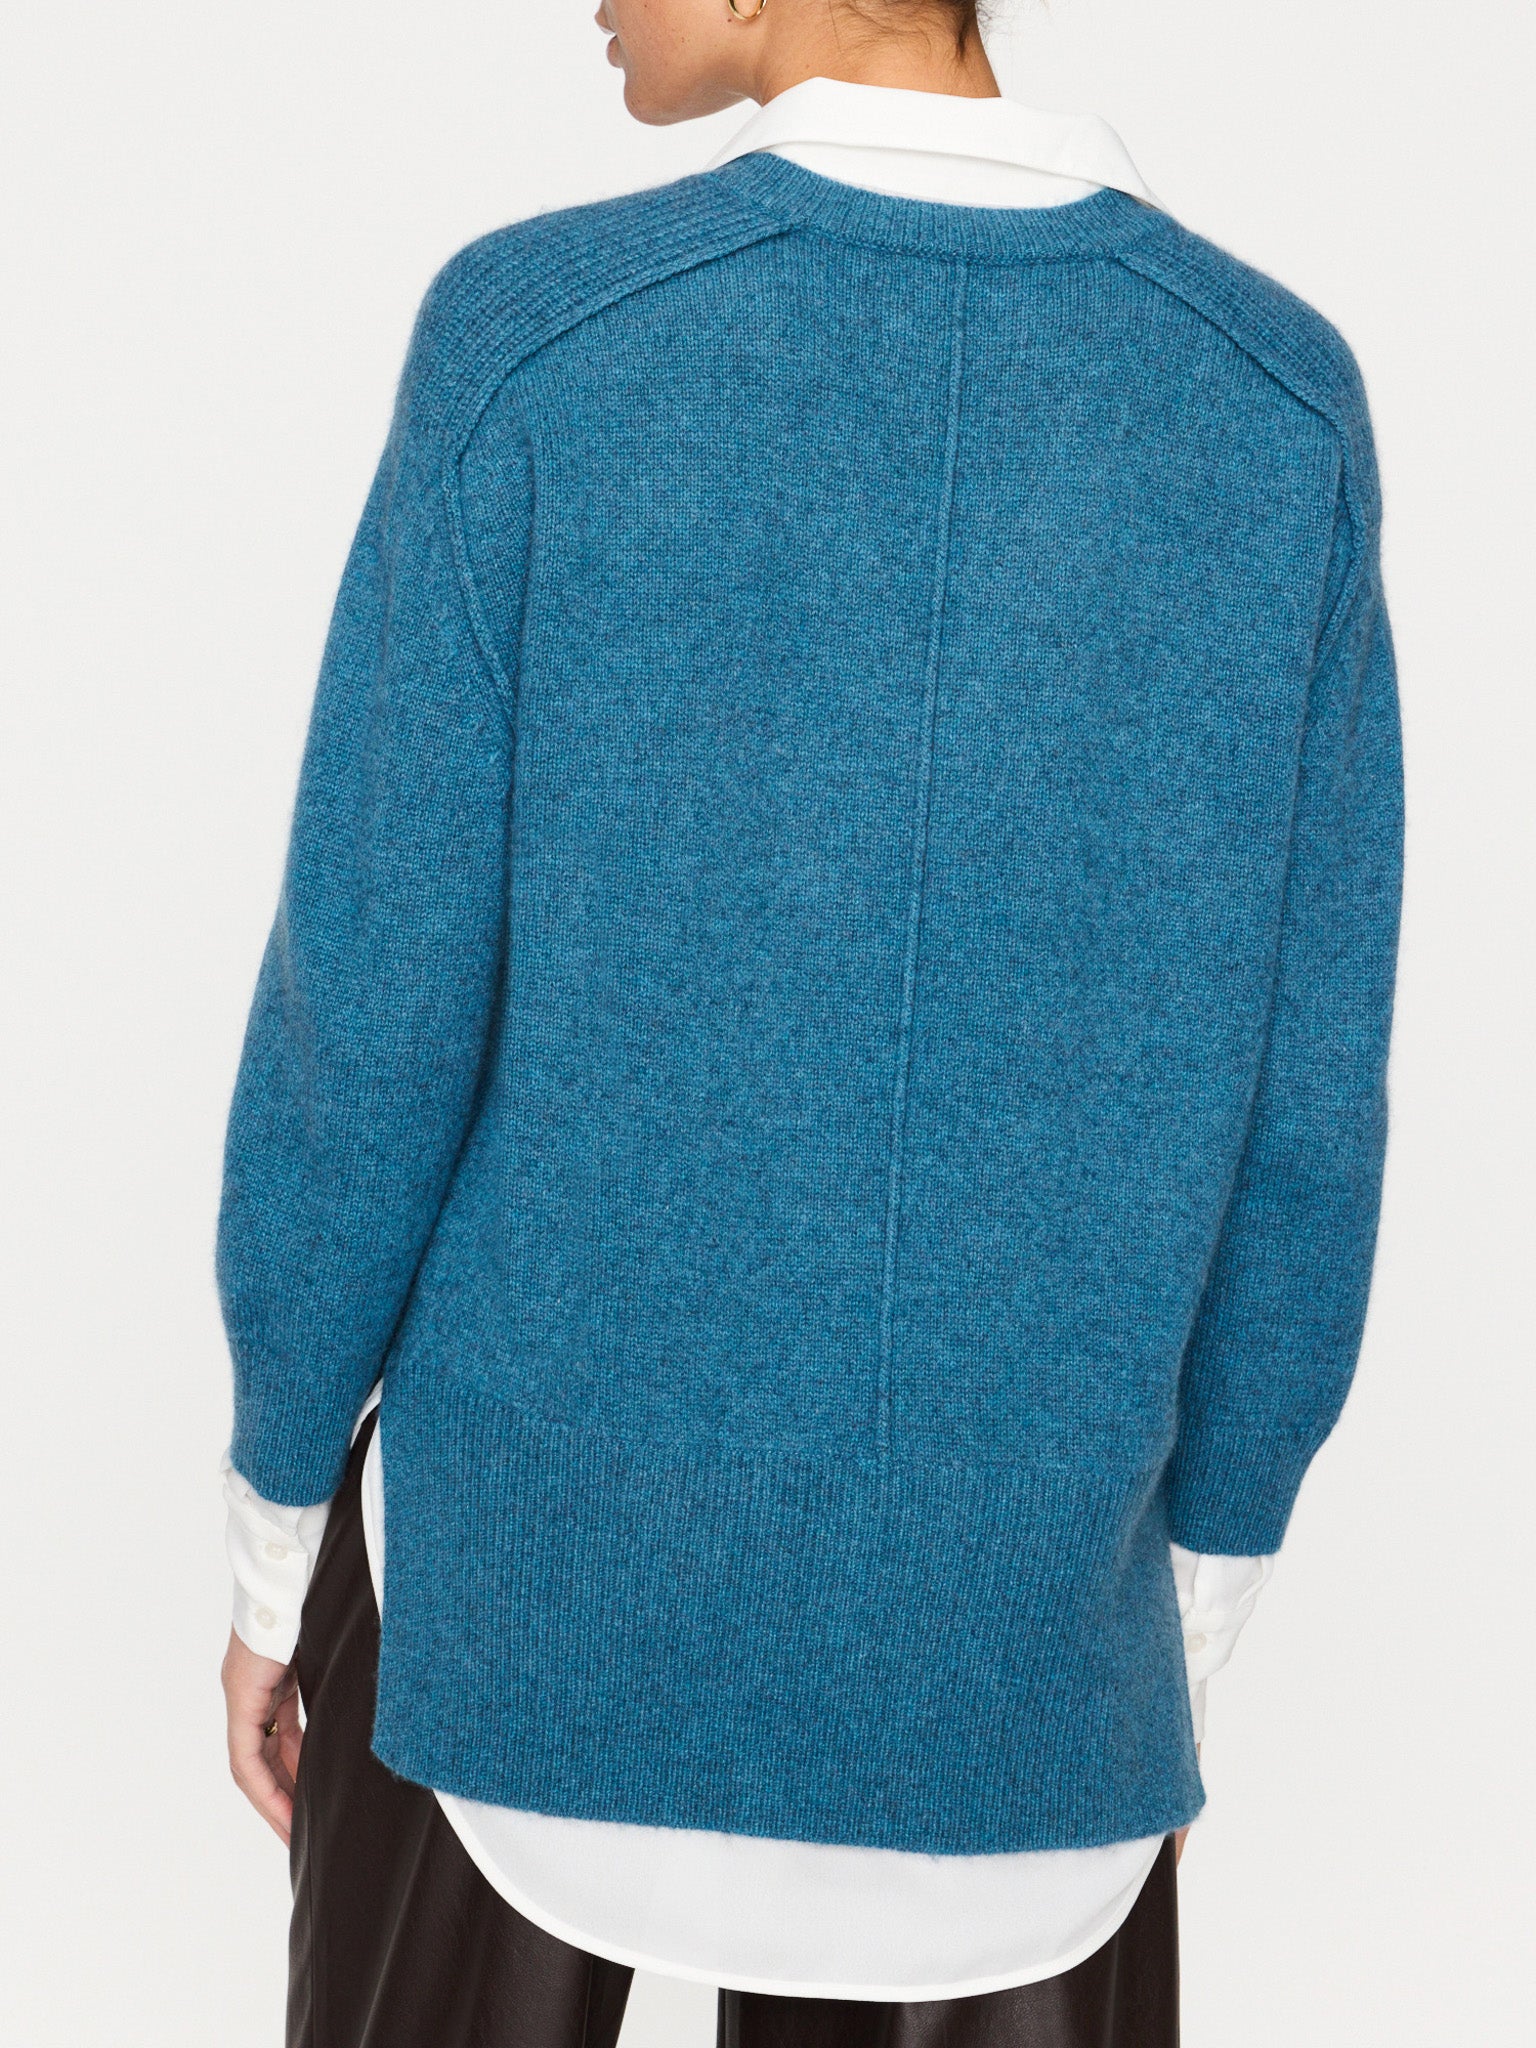 Looker ocean blue layered v-neck sweater back view